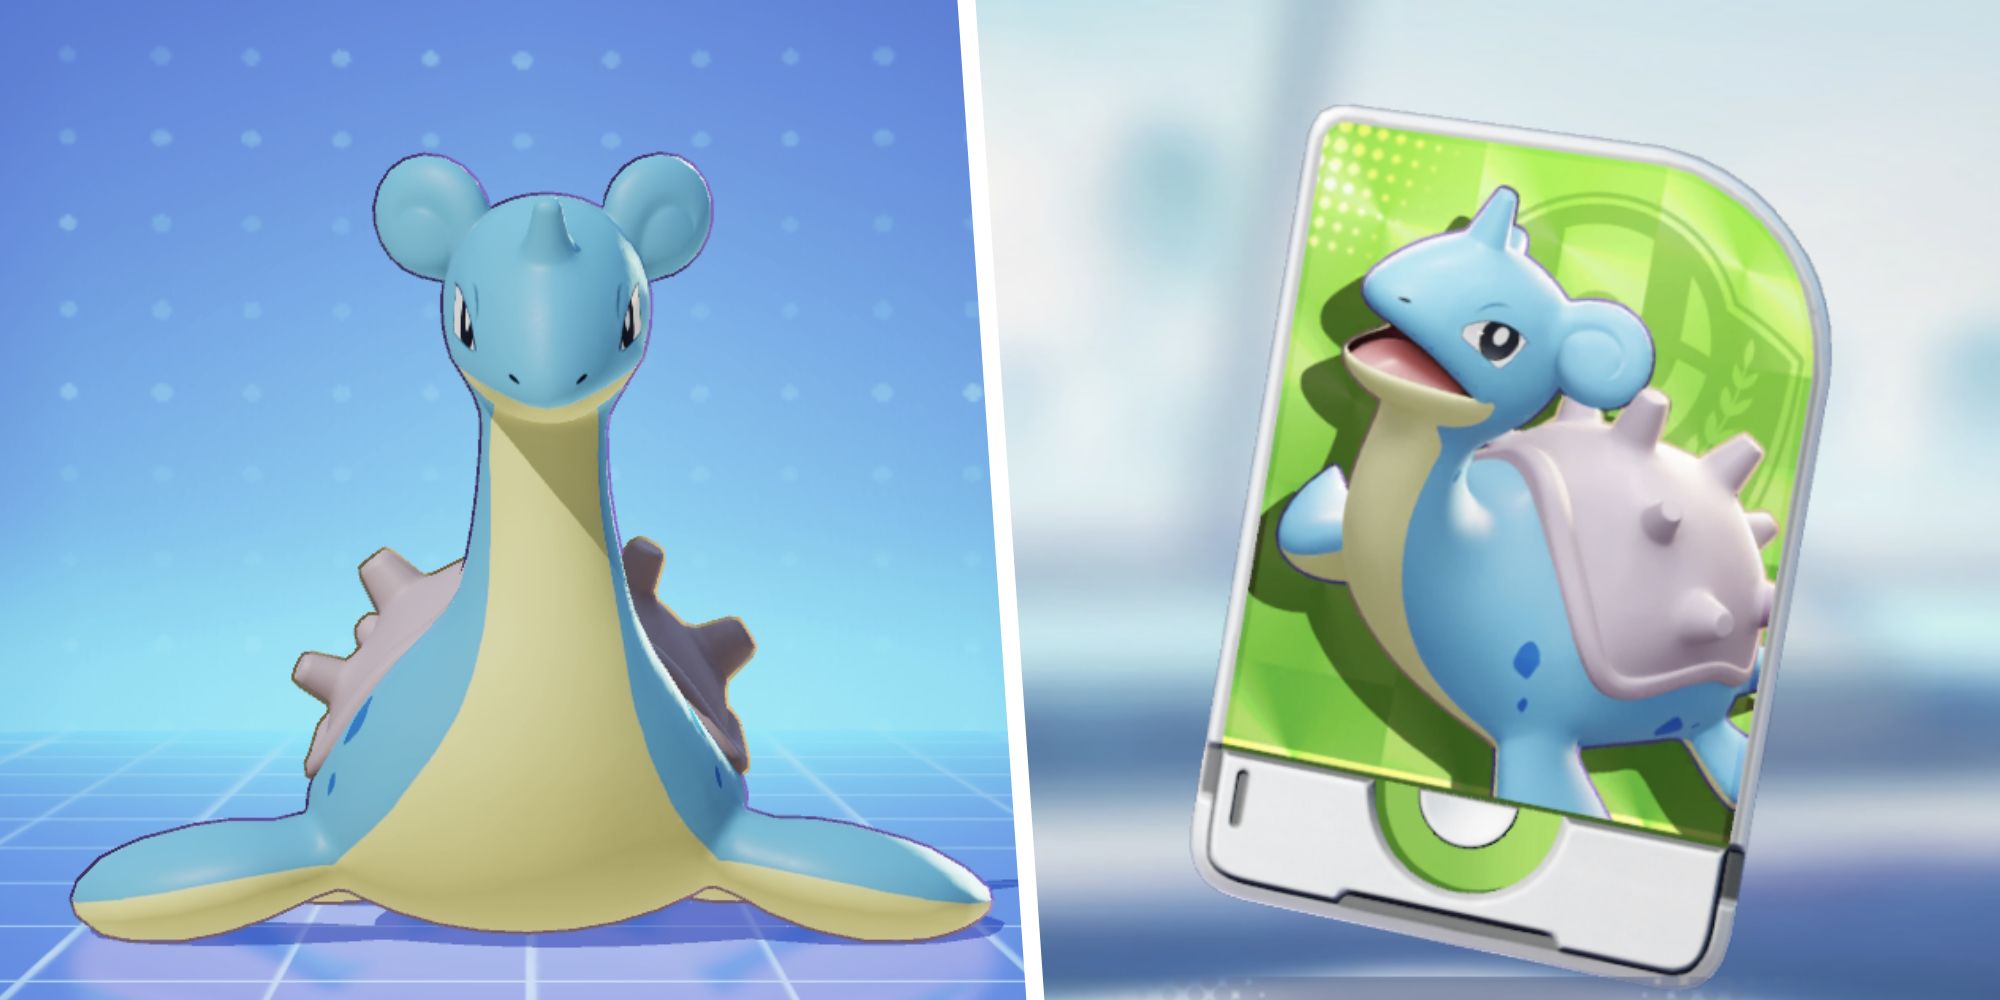 Image of Lapras from Pokemon Unite split with an image of the Lapras Unite License